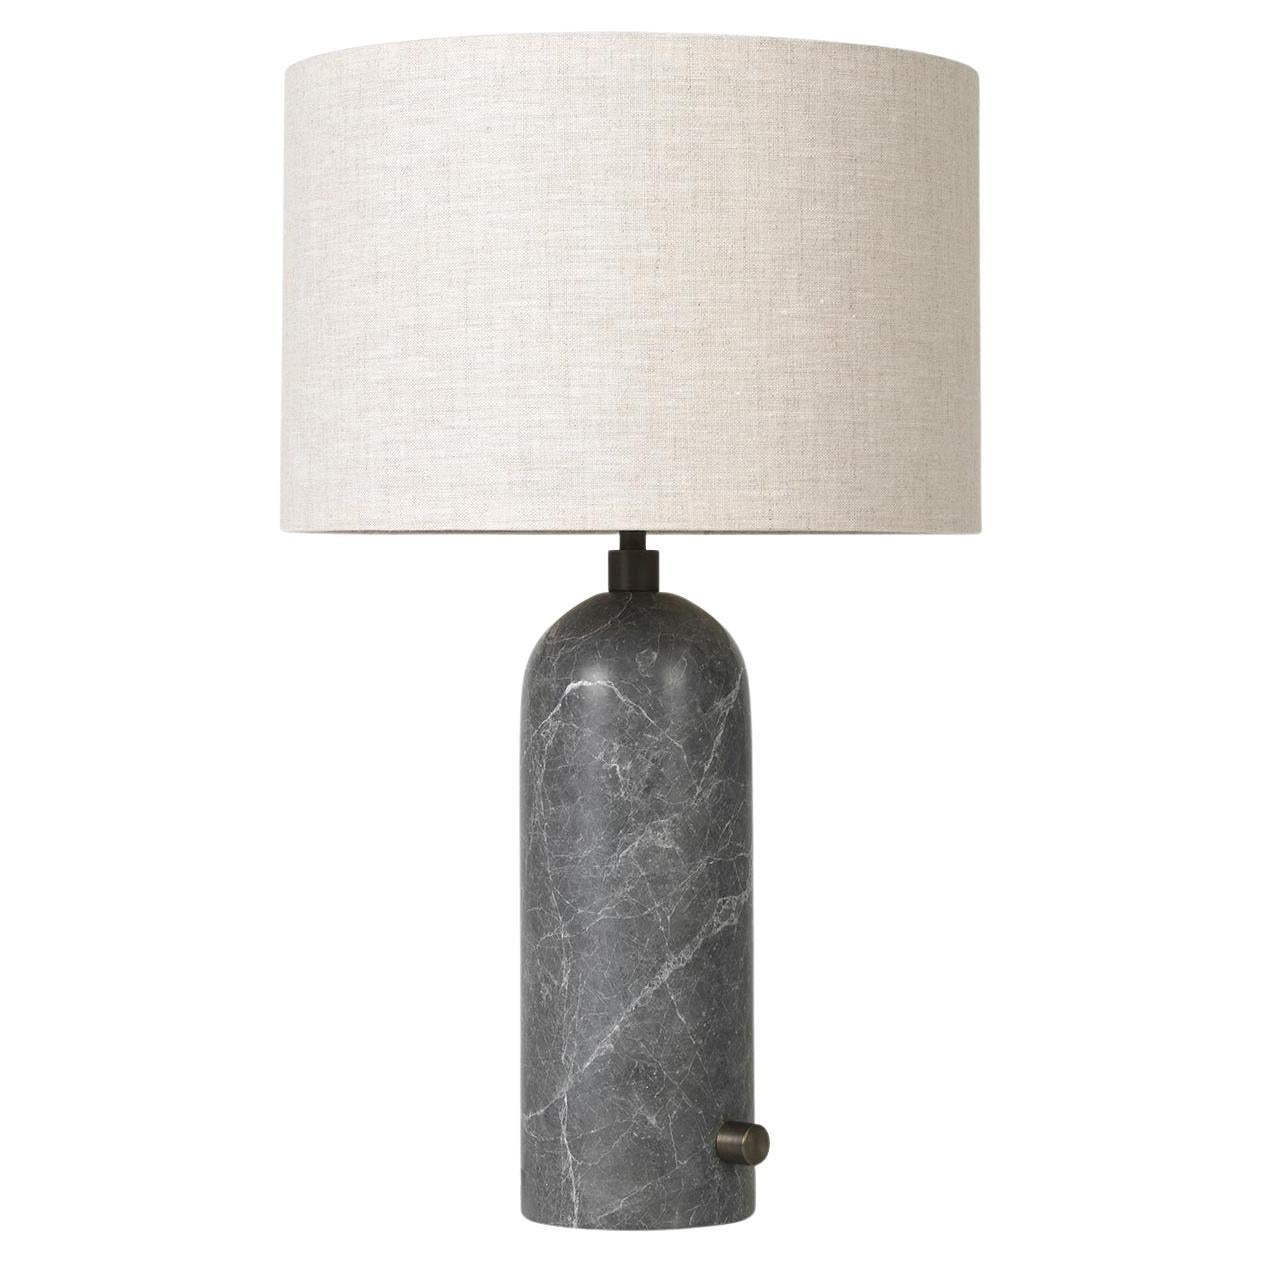 Gravity Table Lamp - Small, Grey Marble, Canvas For Sale